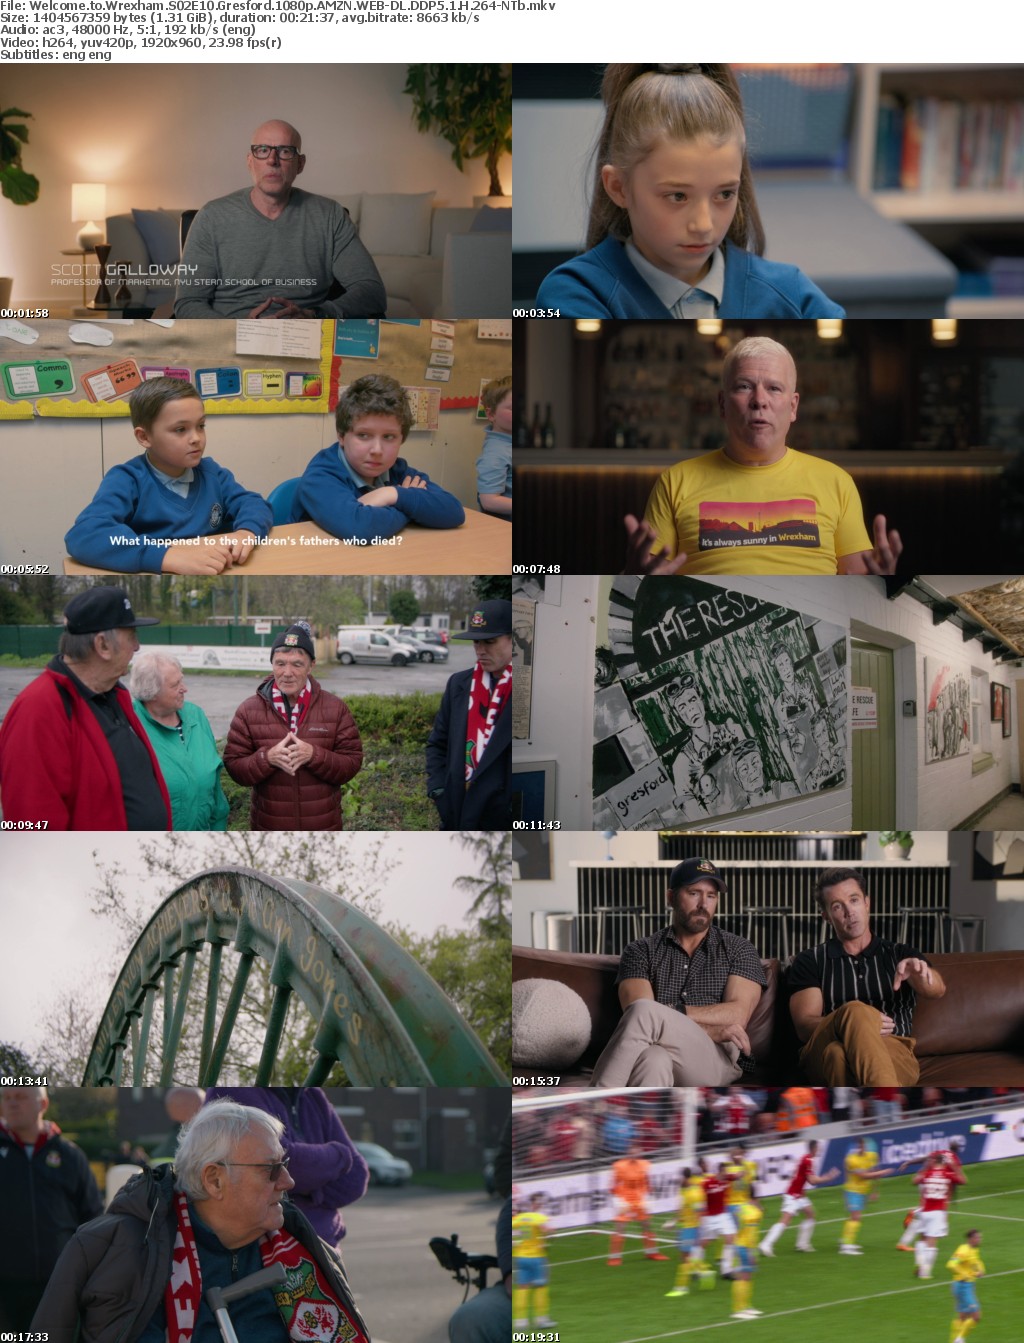 Welcome to Wrexham S02E10 Gresford 1080p AMZN WEB-DL DDP5 1 H 264-NTb